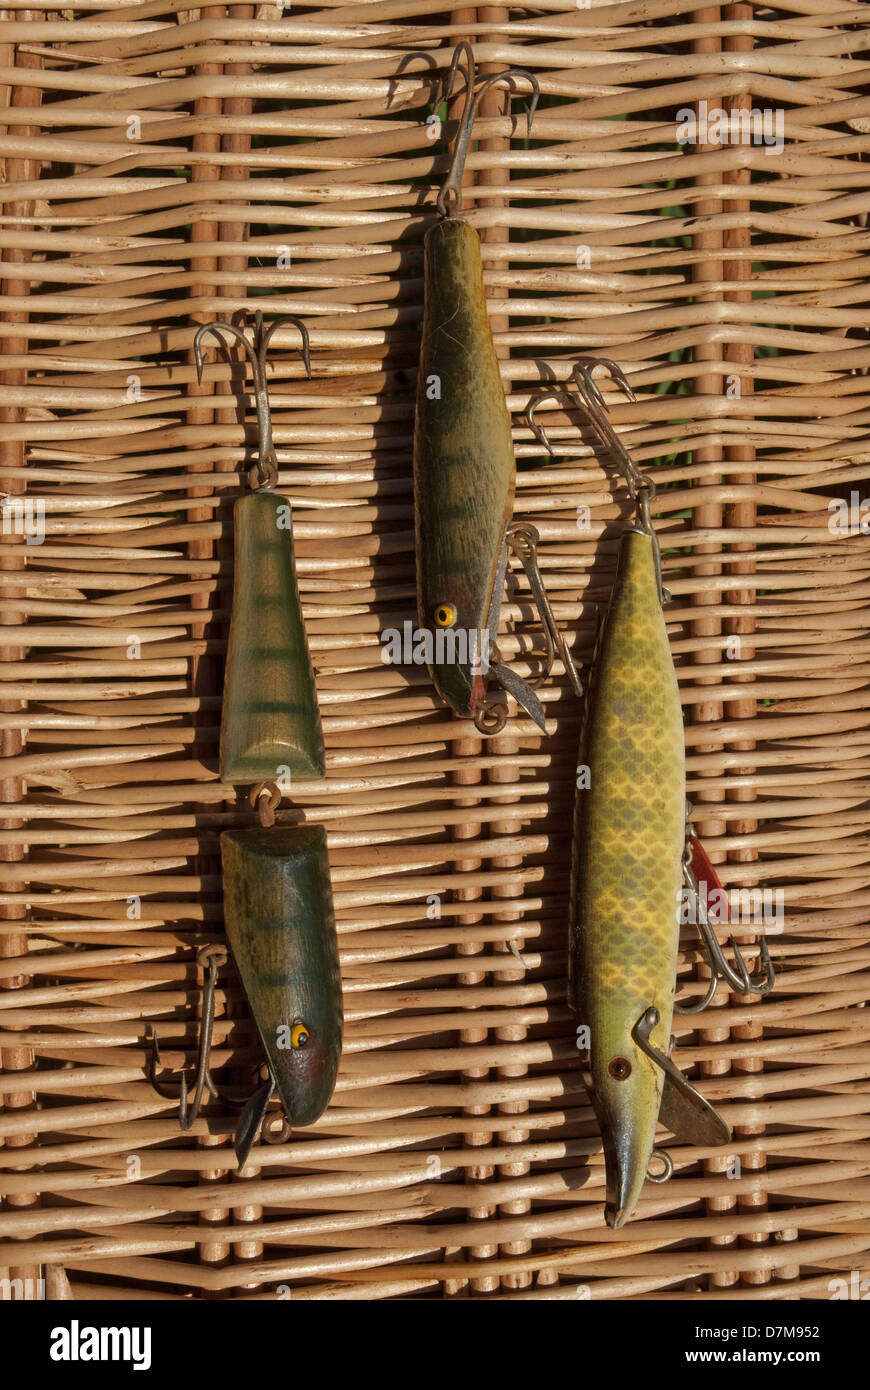 Antique Fishing Lures are Valuable To Collectors Stock Photo - Image of  snare, wooden: 225452218, valuable antique fishing lures 